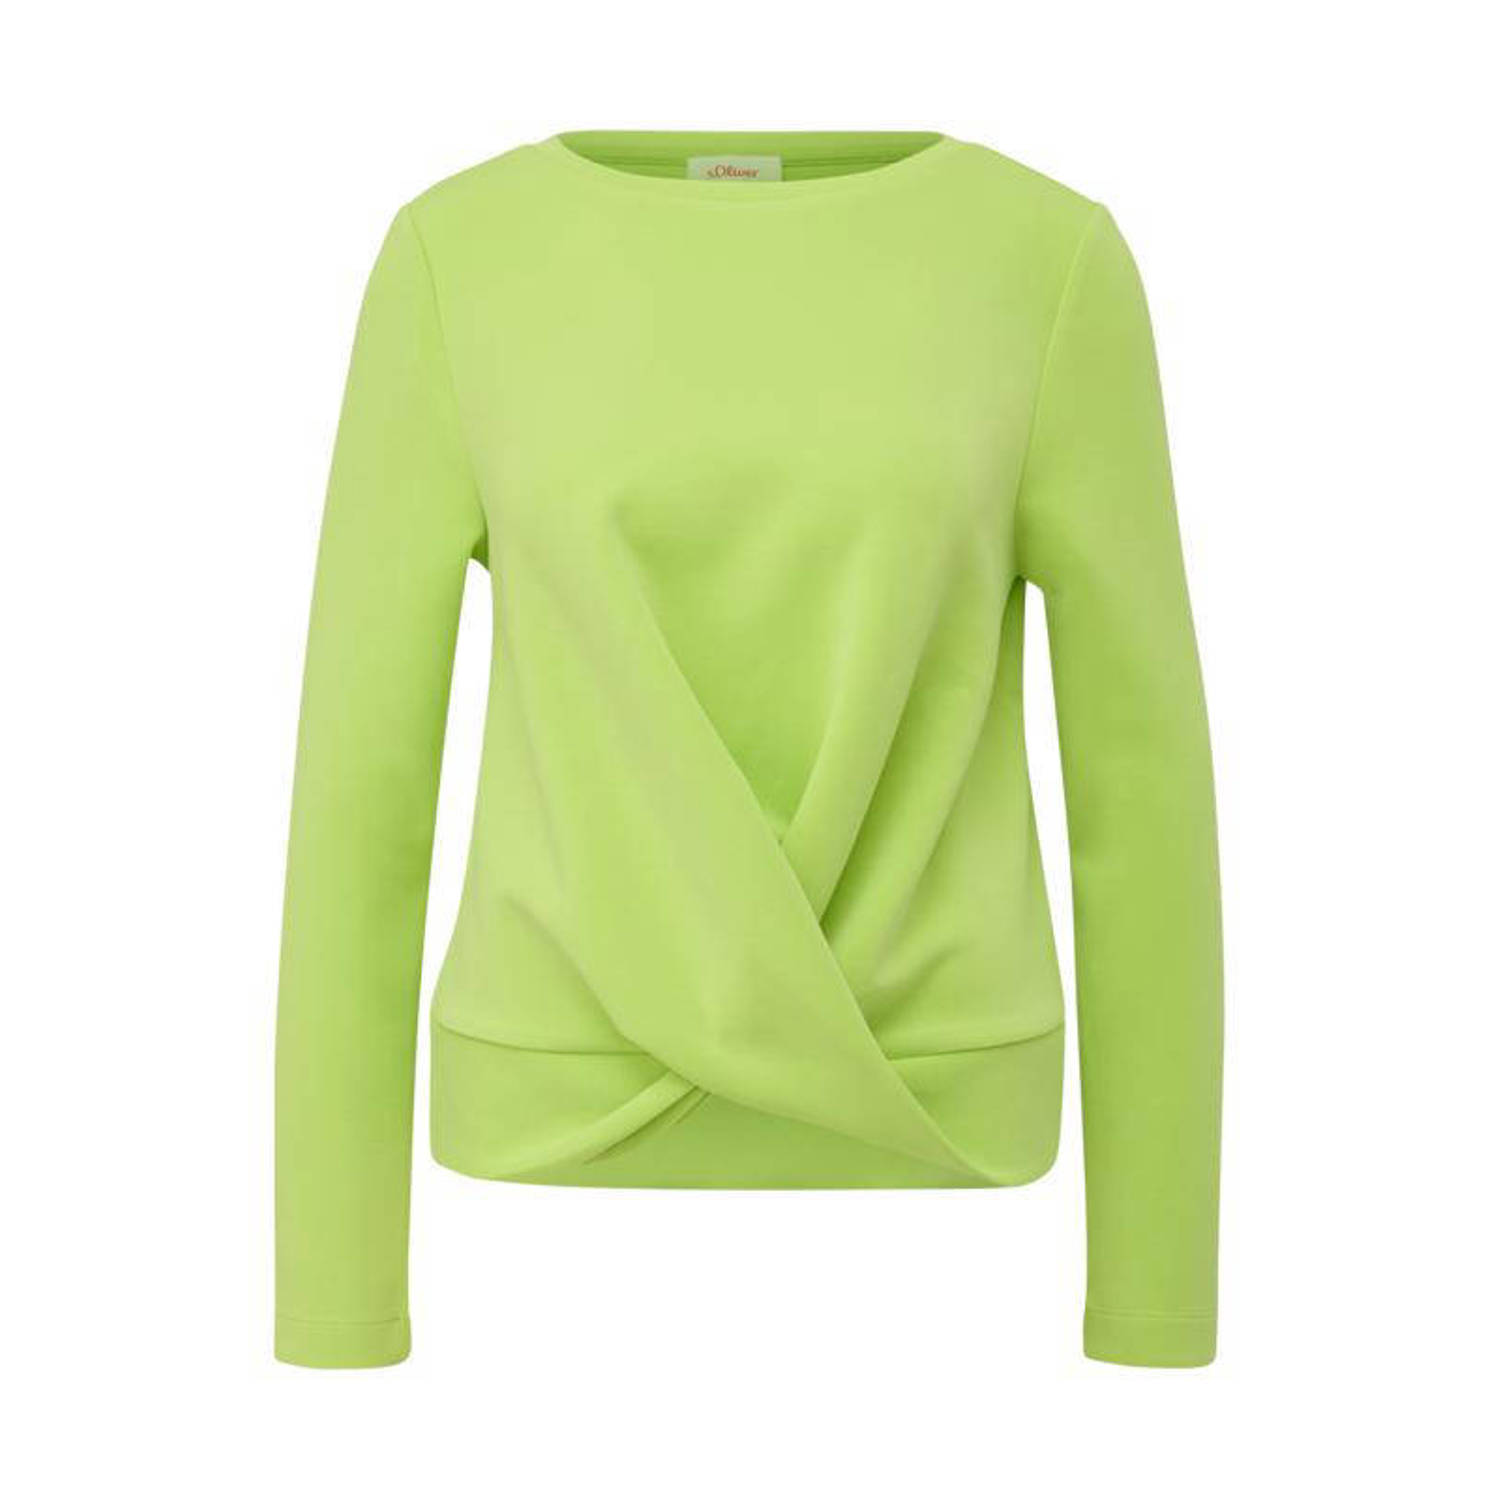 S.Oliver sweat top limegroen